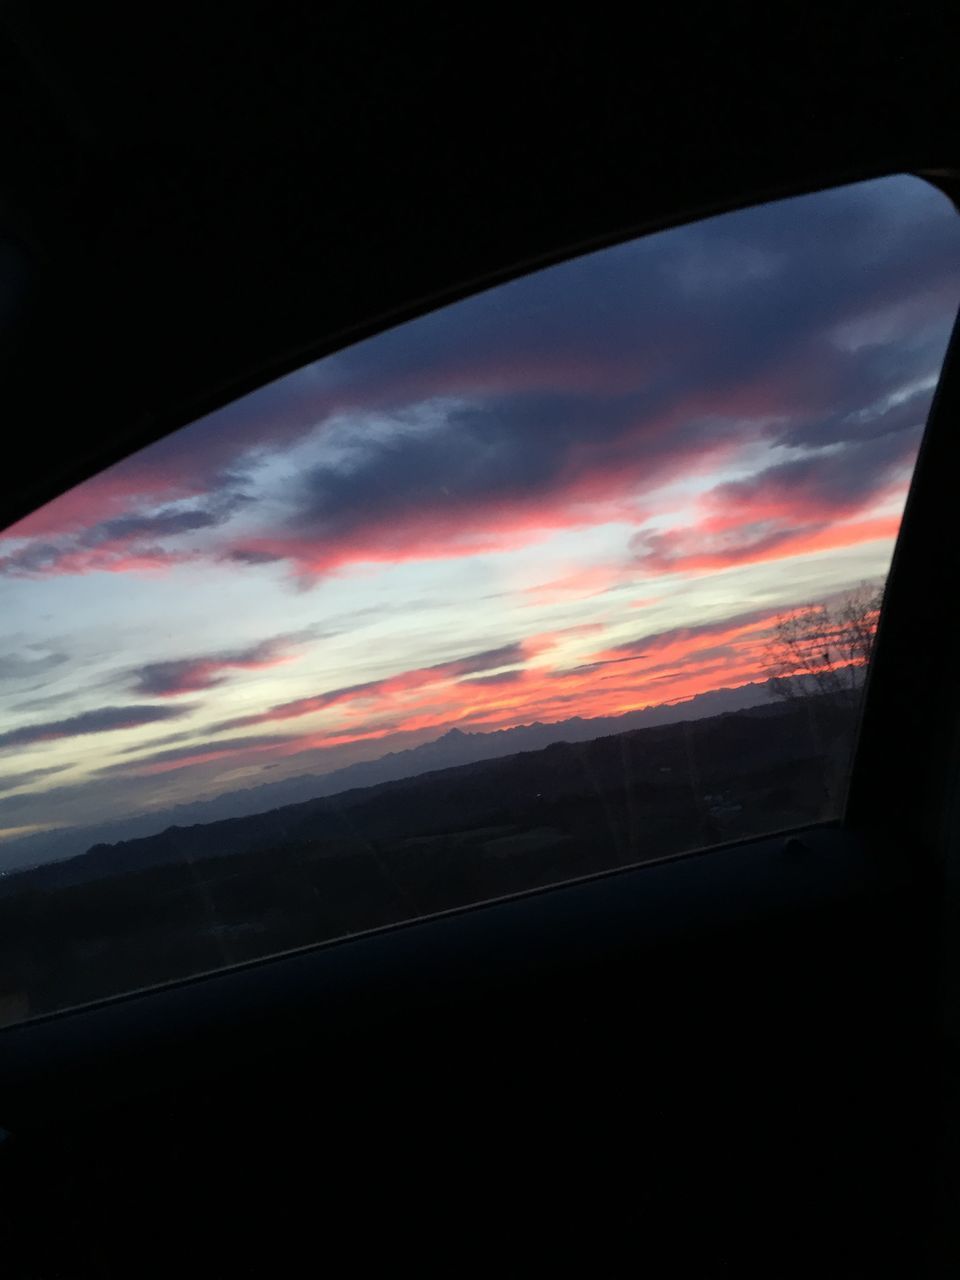 LOW ANGLE VIEW OF DRAMATIC SKY OVER SILHOUETTE CAR WINDOW